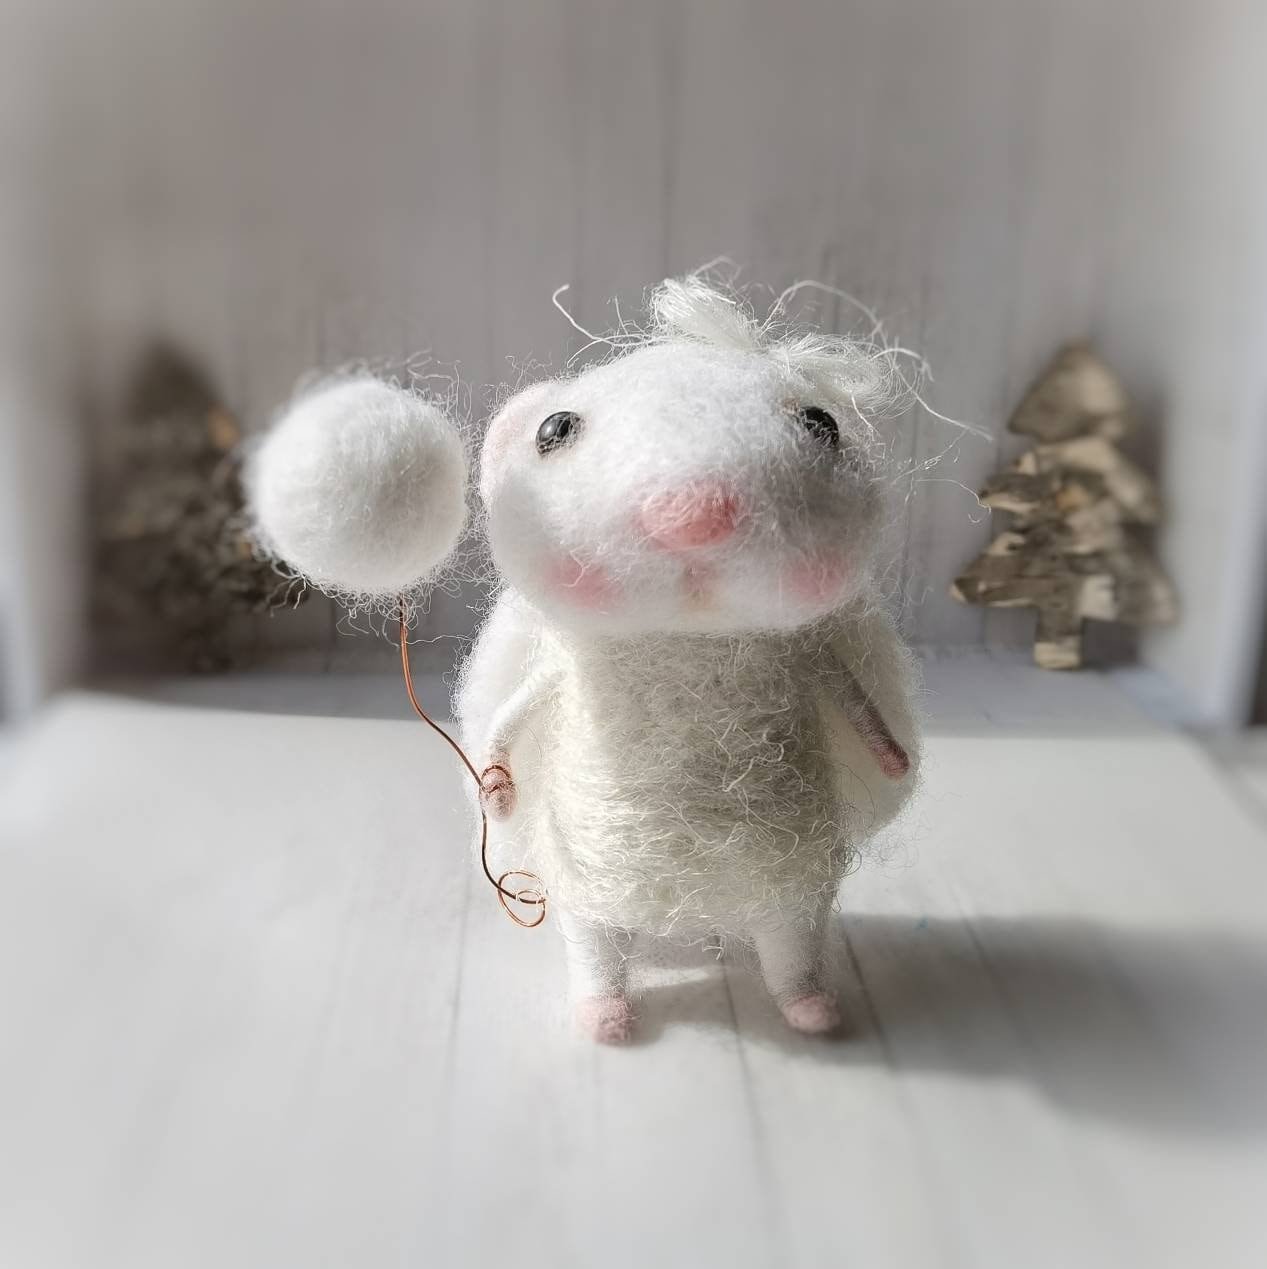 Needle felted mouse Felted mouse Birthday gift Christmas ornament Figurine love heart gifts  Wool doll Felt art presents